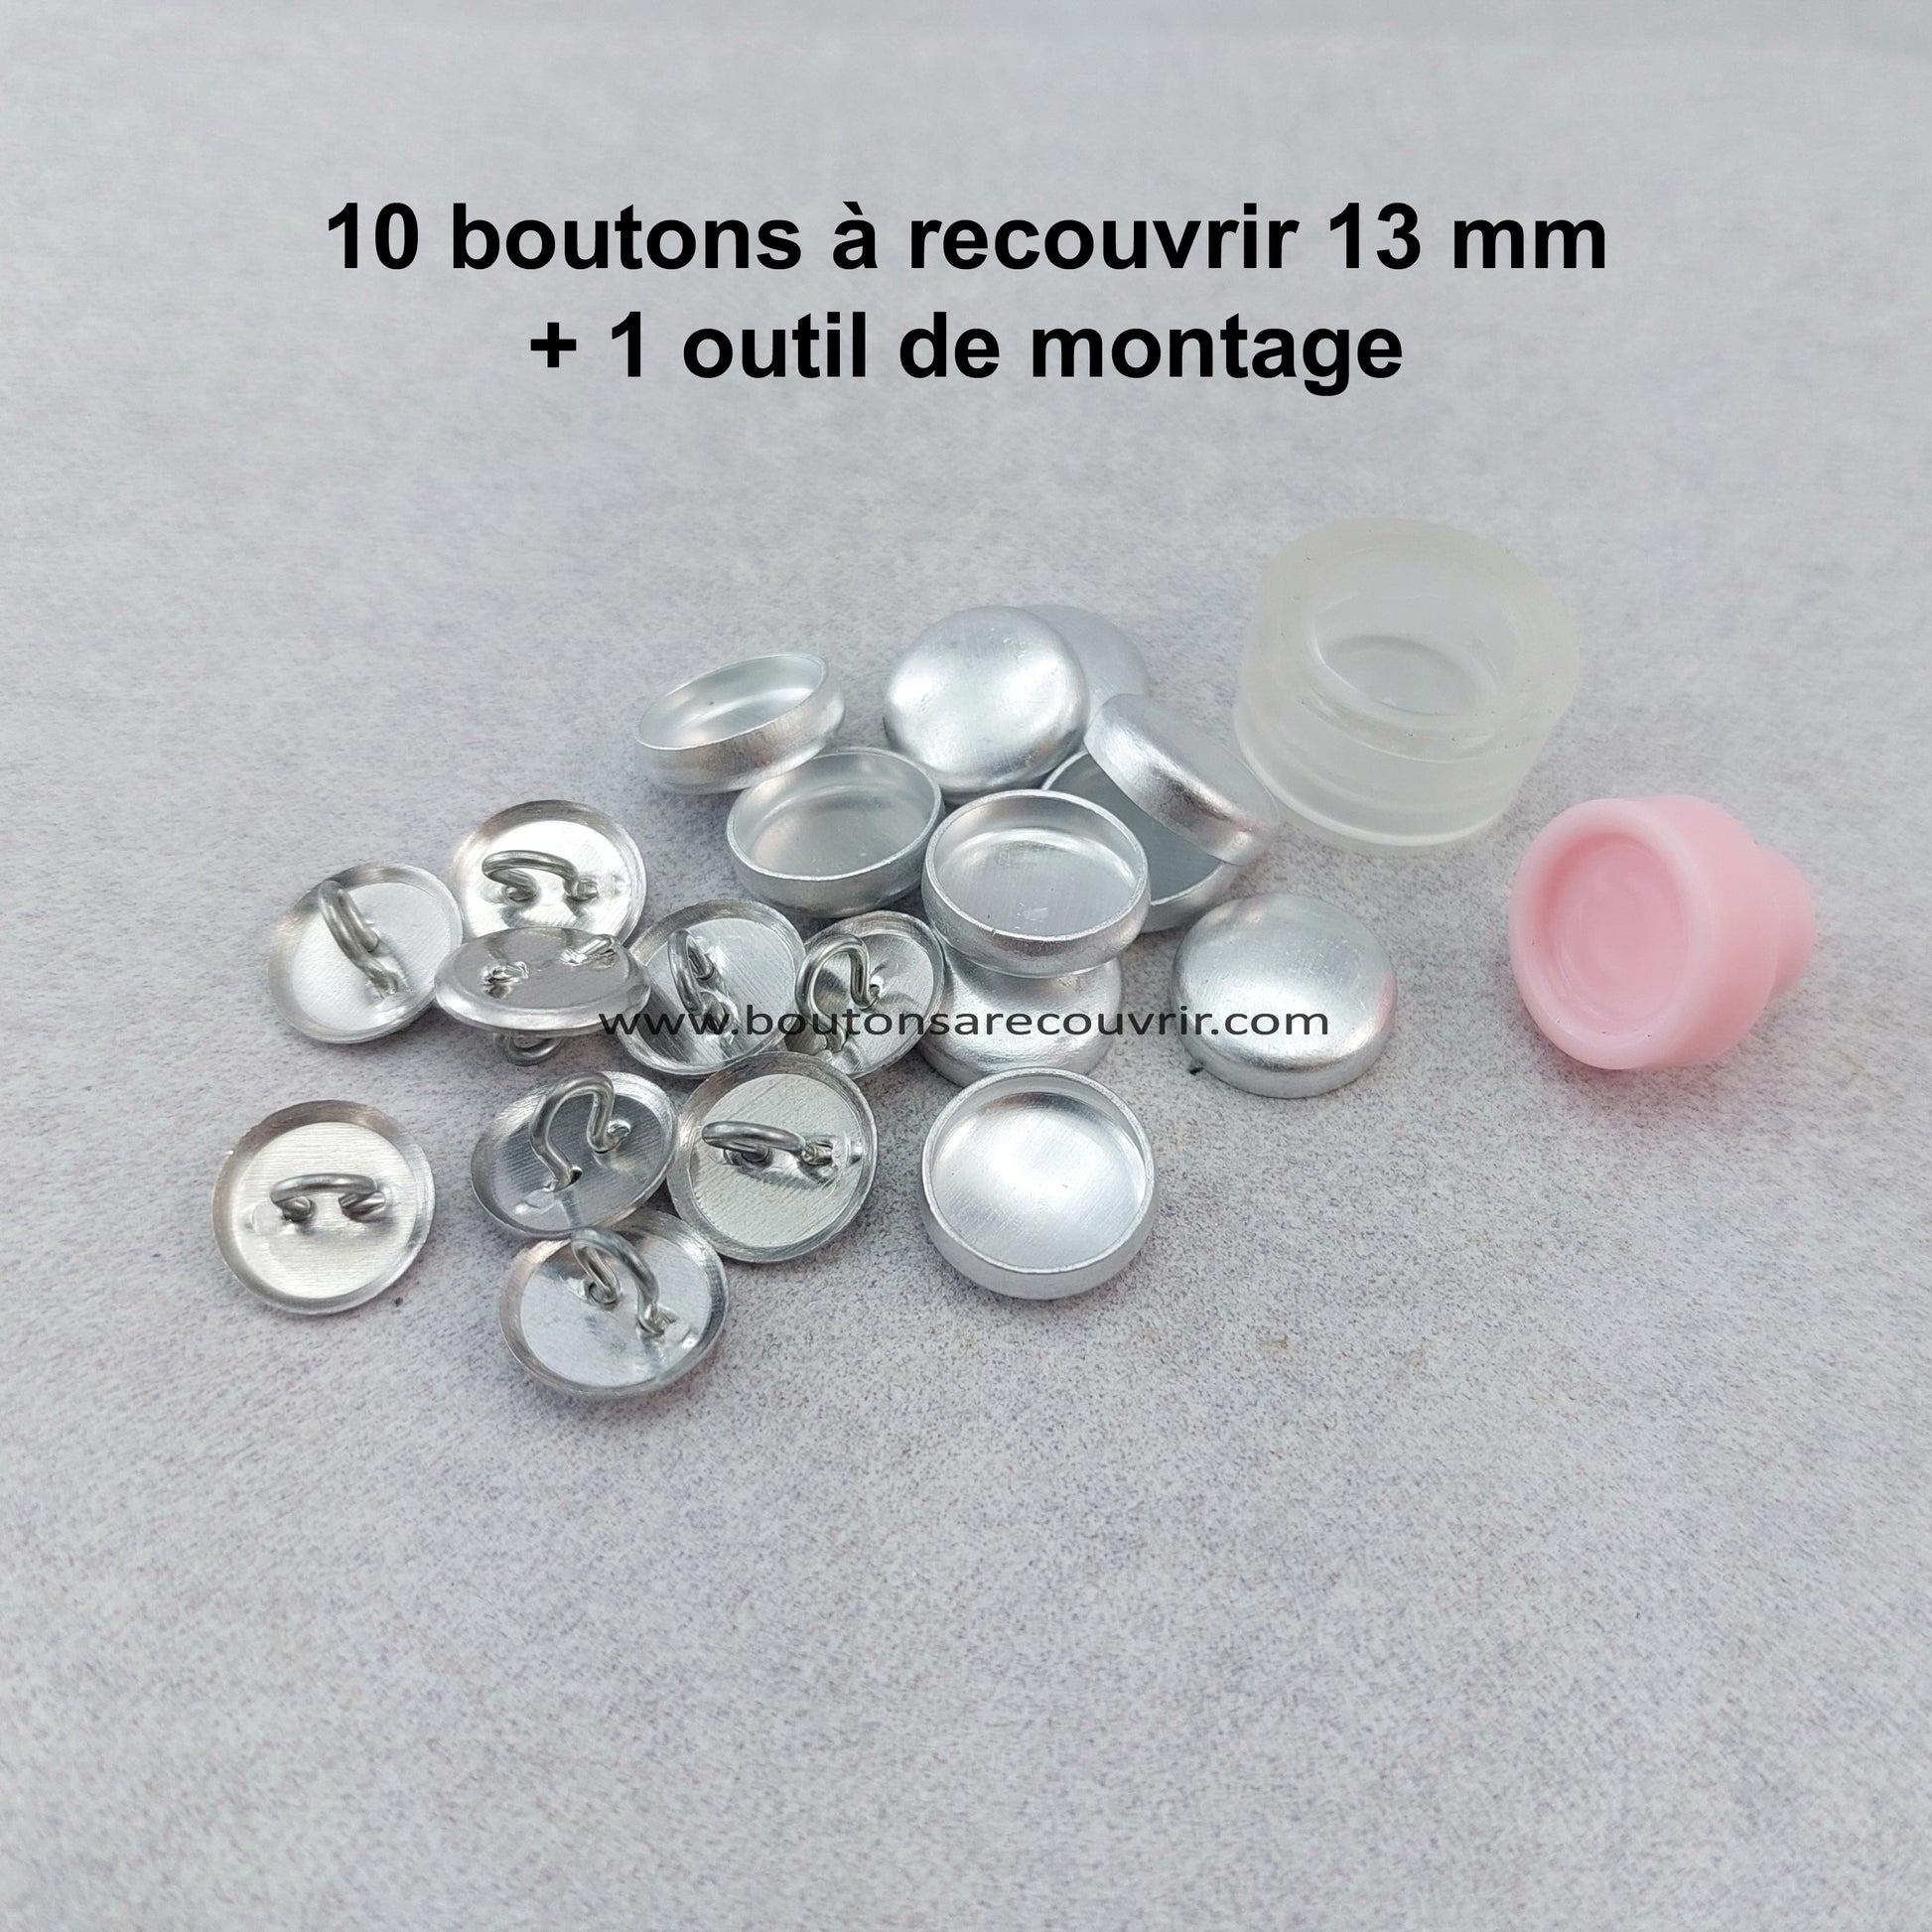 10 boutons à recouvrir 13 mm + outil montage